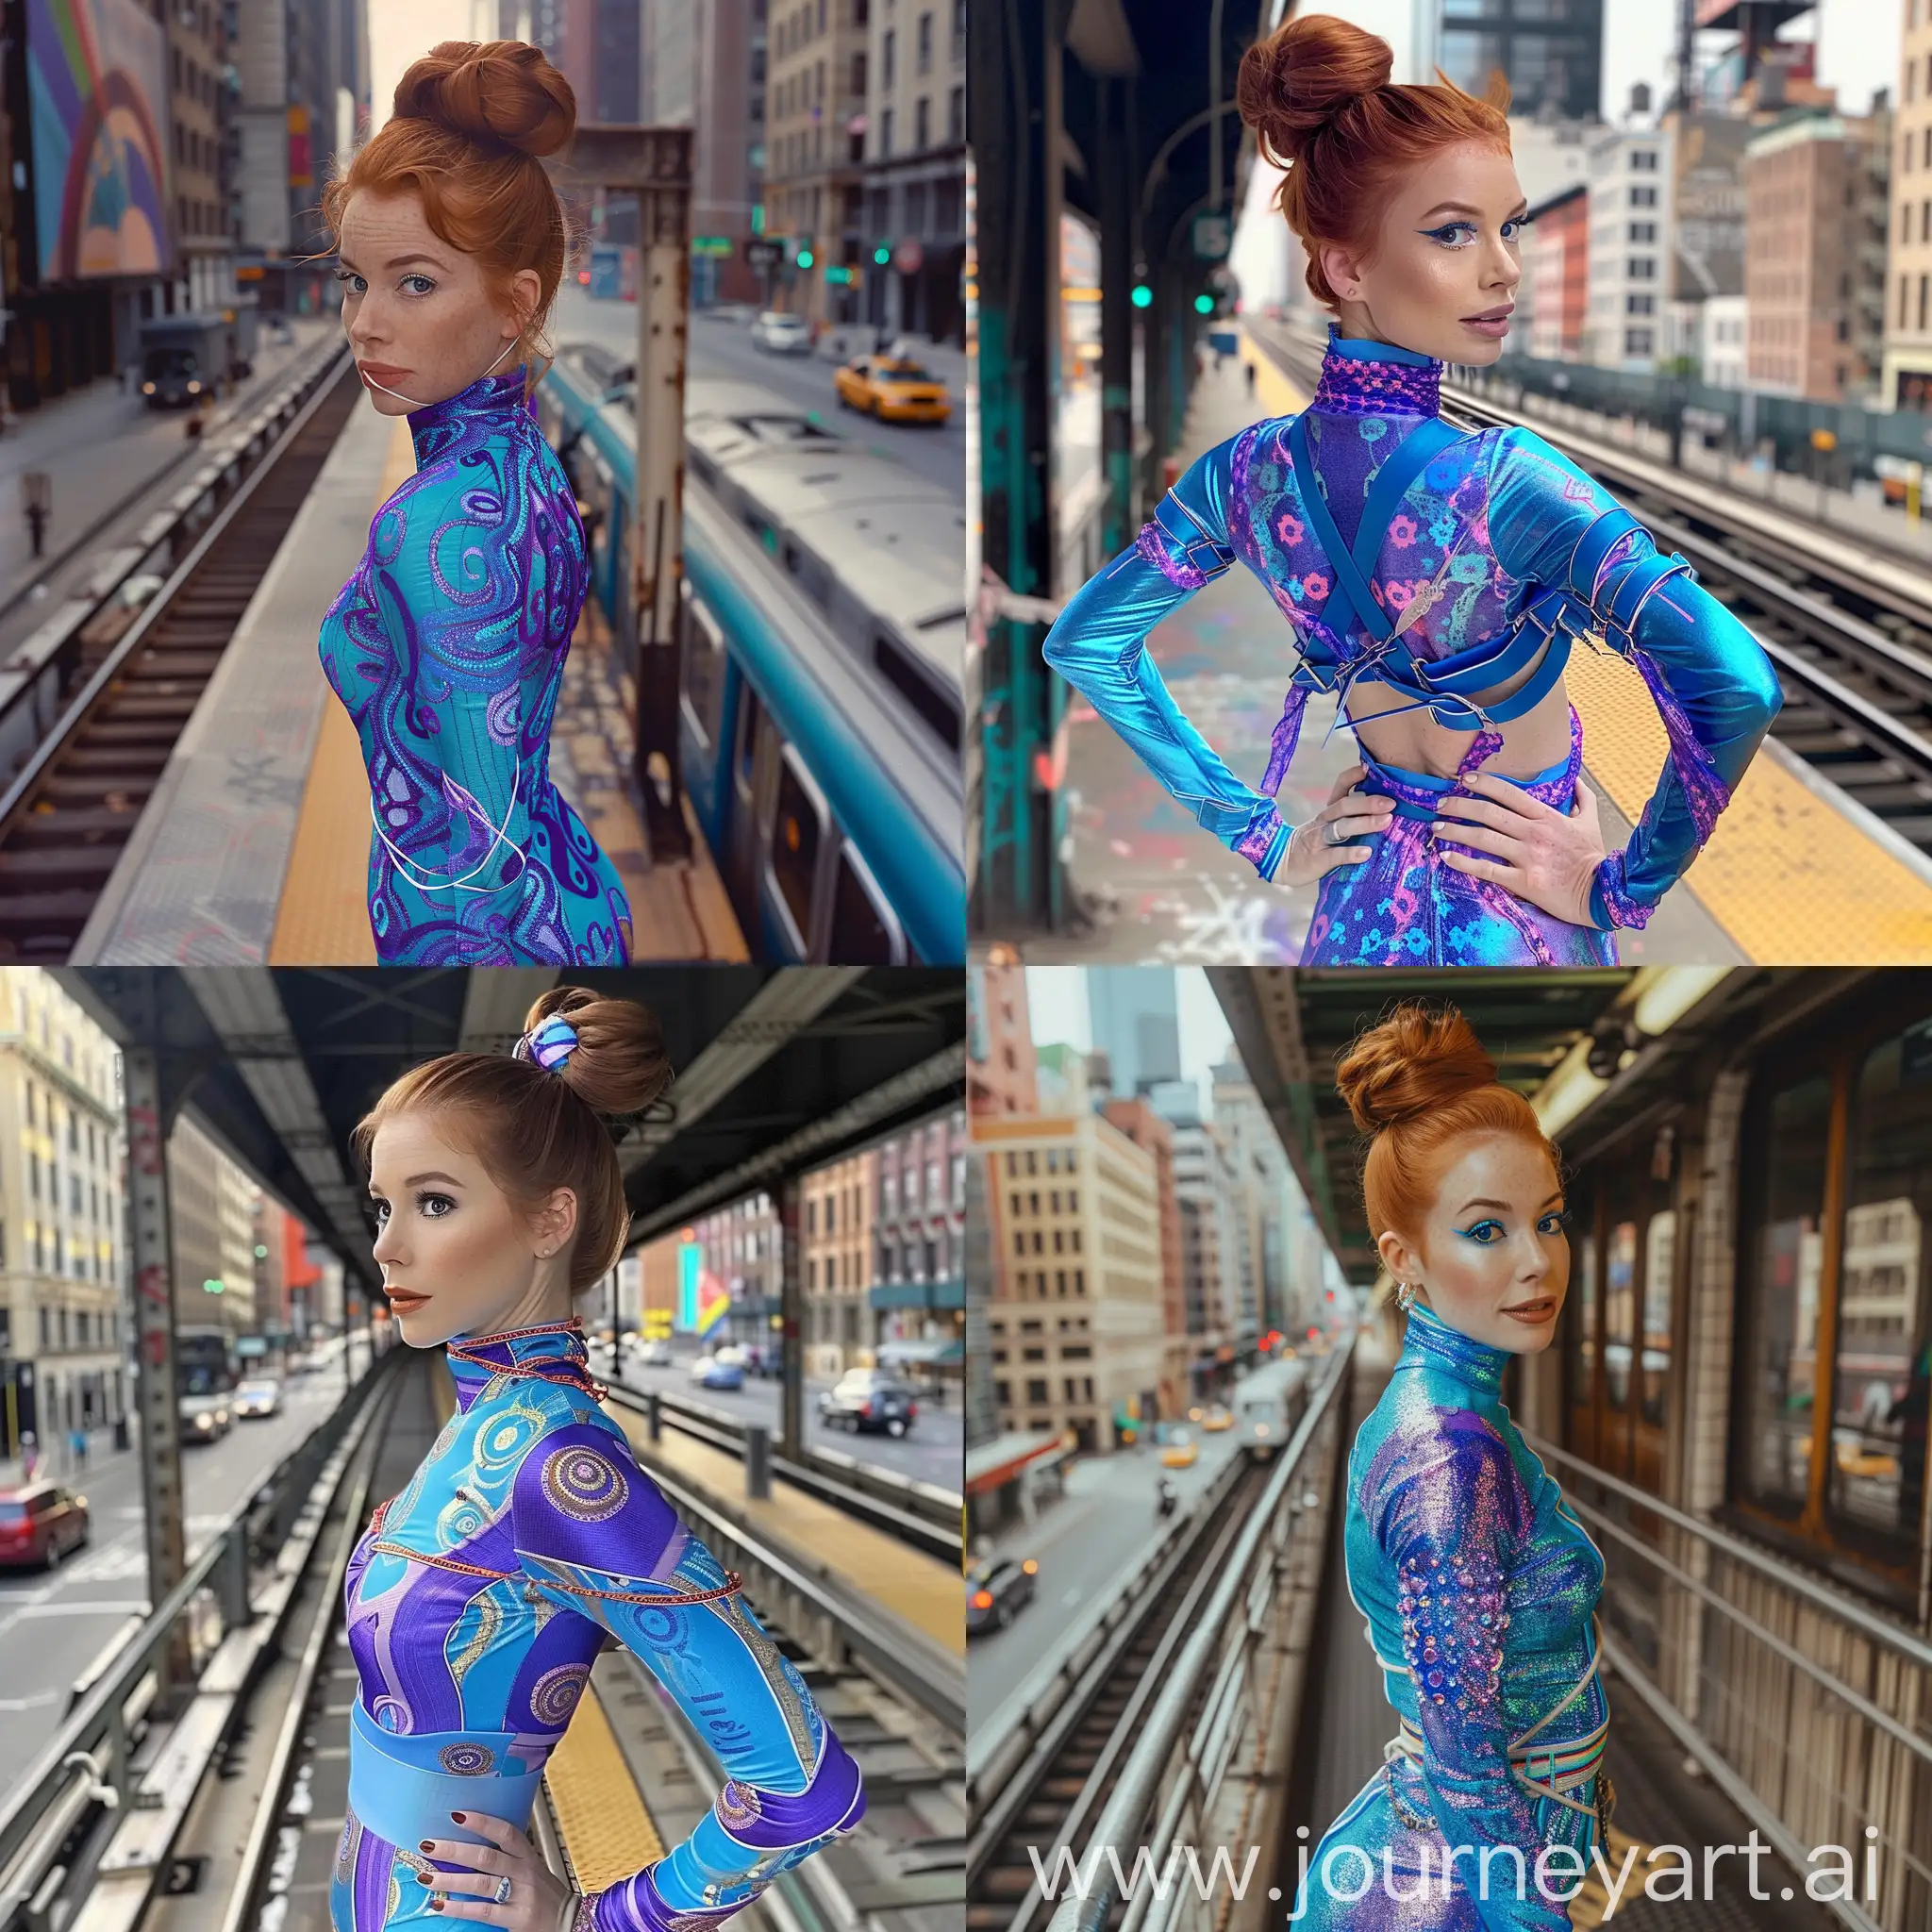 A young 25 year old caucasian white woman, Cute and attractive, ginger hair in a bun, blue and purple colorful vibrant outfit. She has her hands tied behined her back. She is standing on an elevated train platform next to a city street. She is being kidnapped by Dr. Evil from Austin Powers